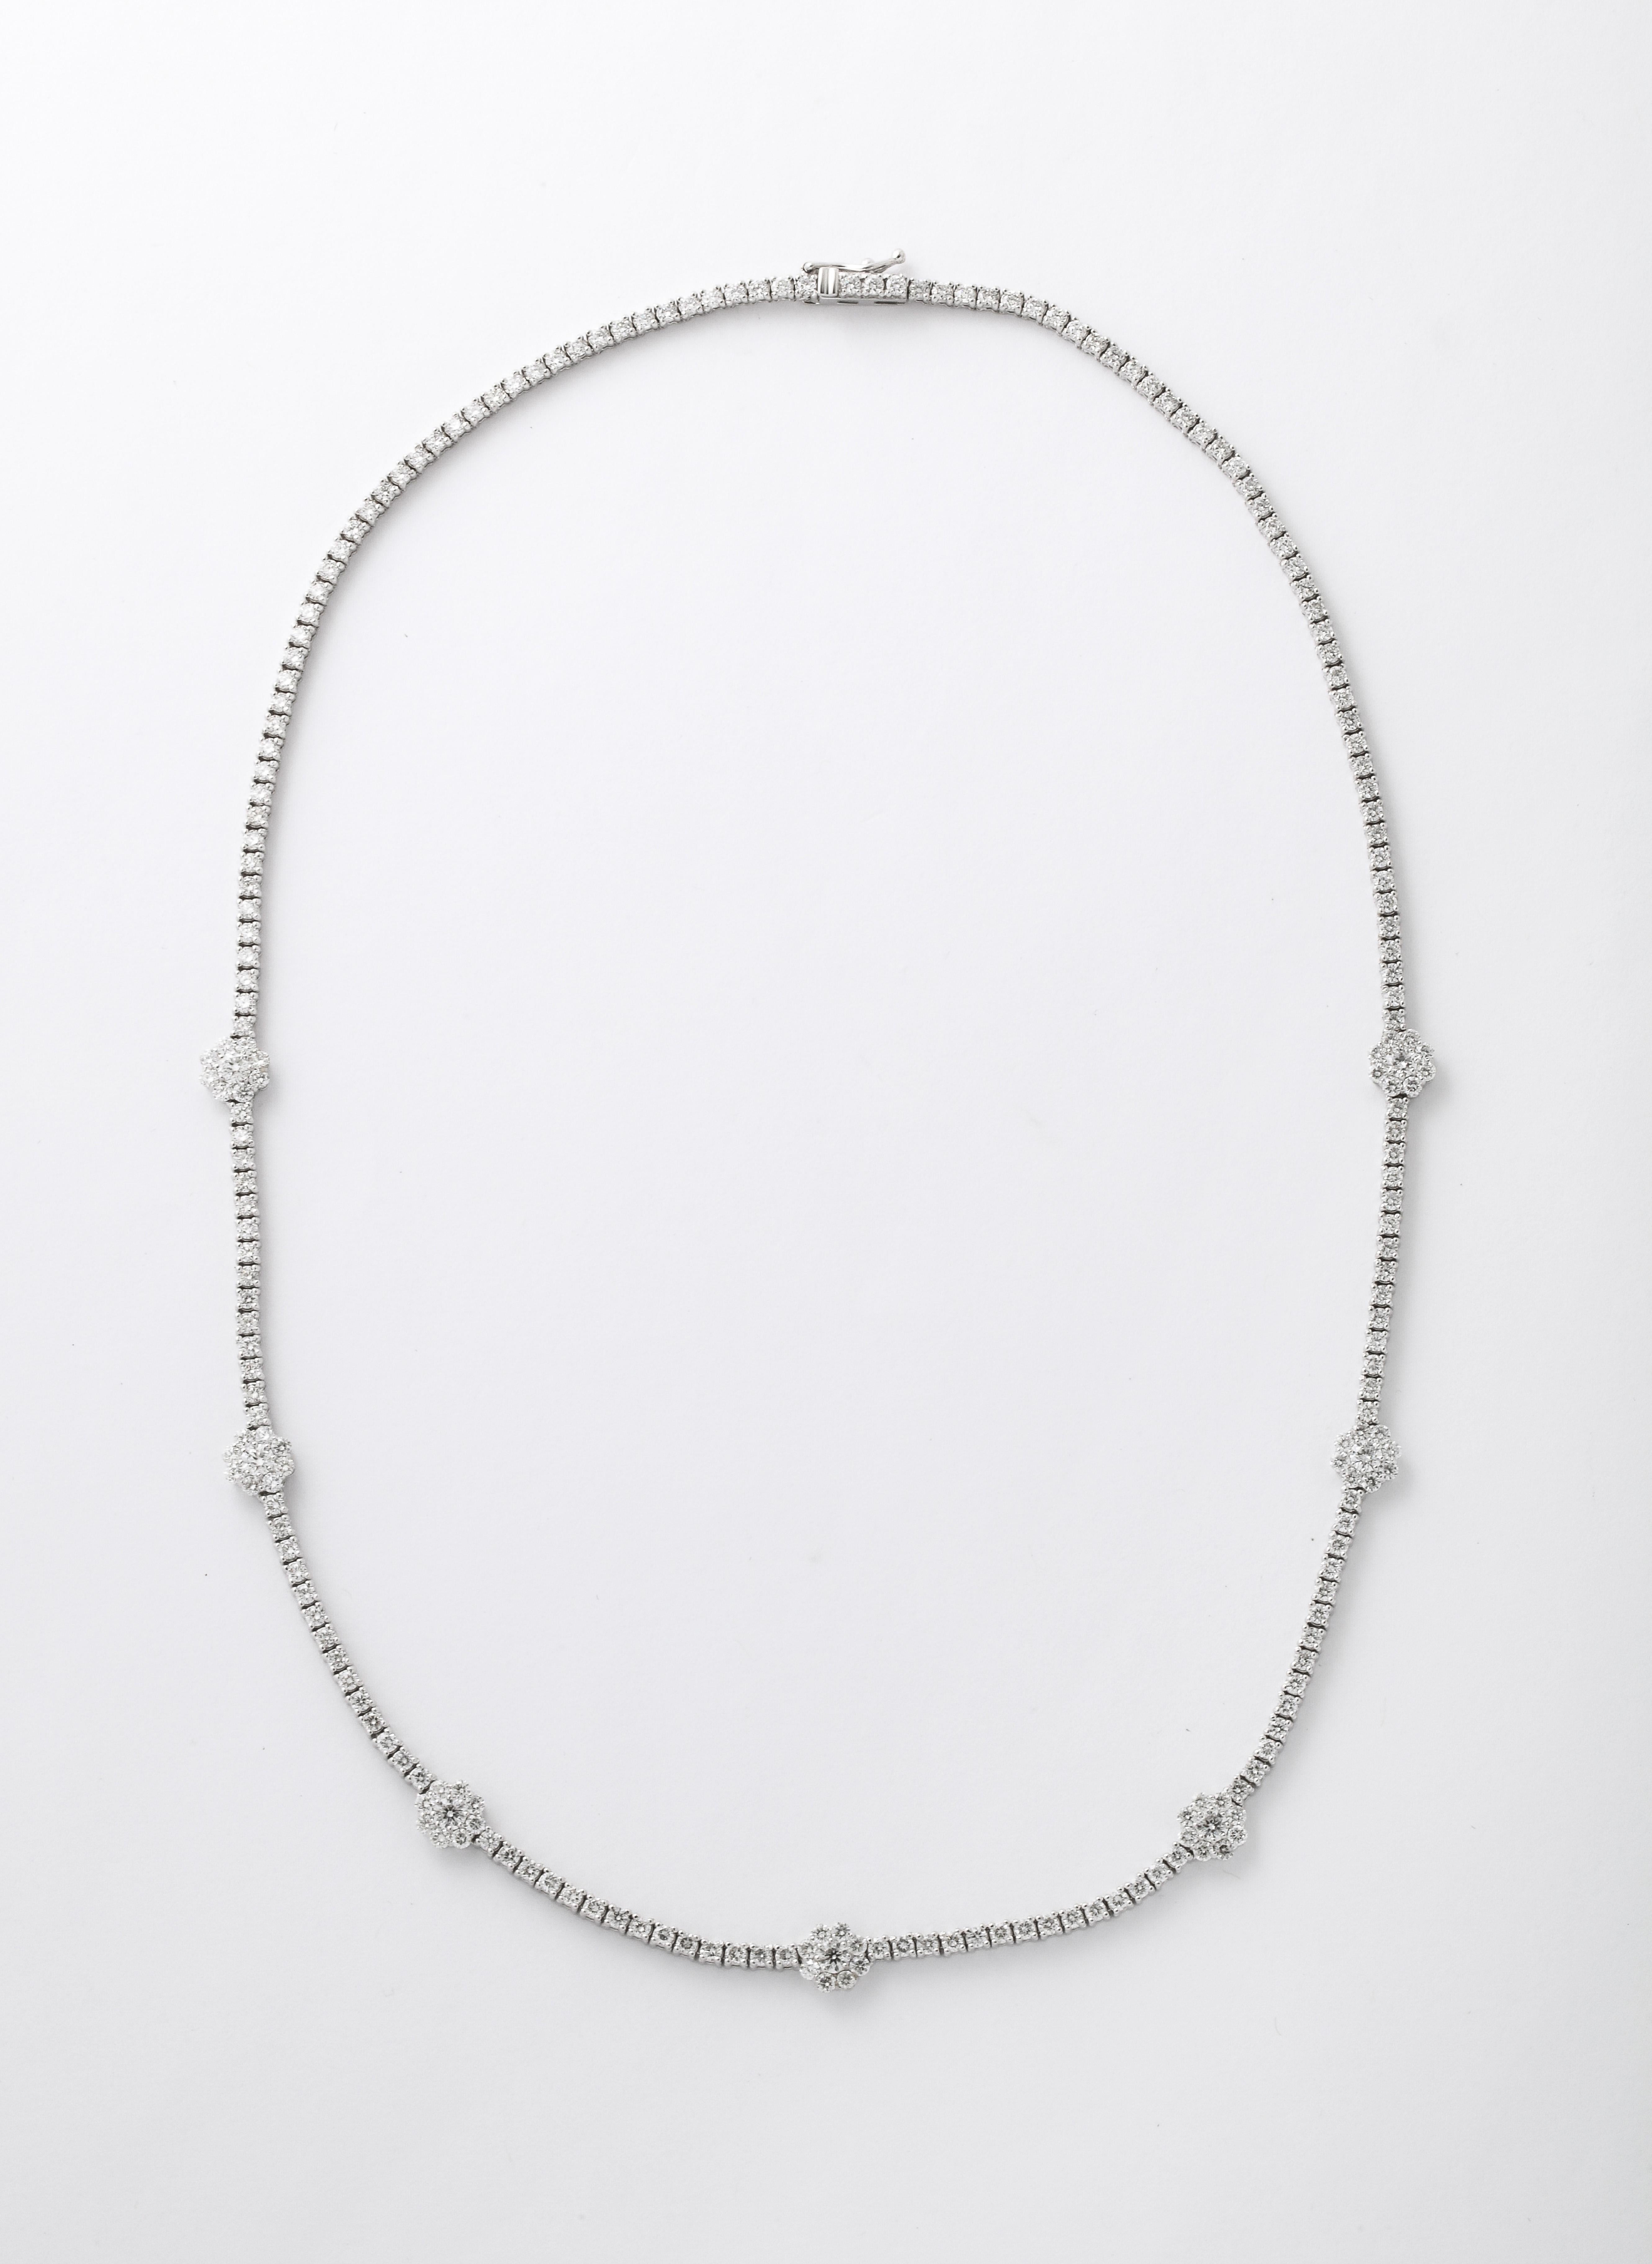 Flower Diamond Tennis Necklace  In New Condition For Sale In New York, NY